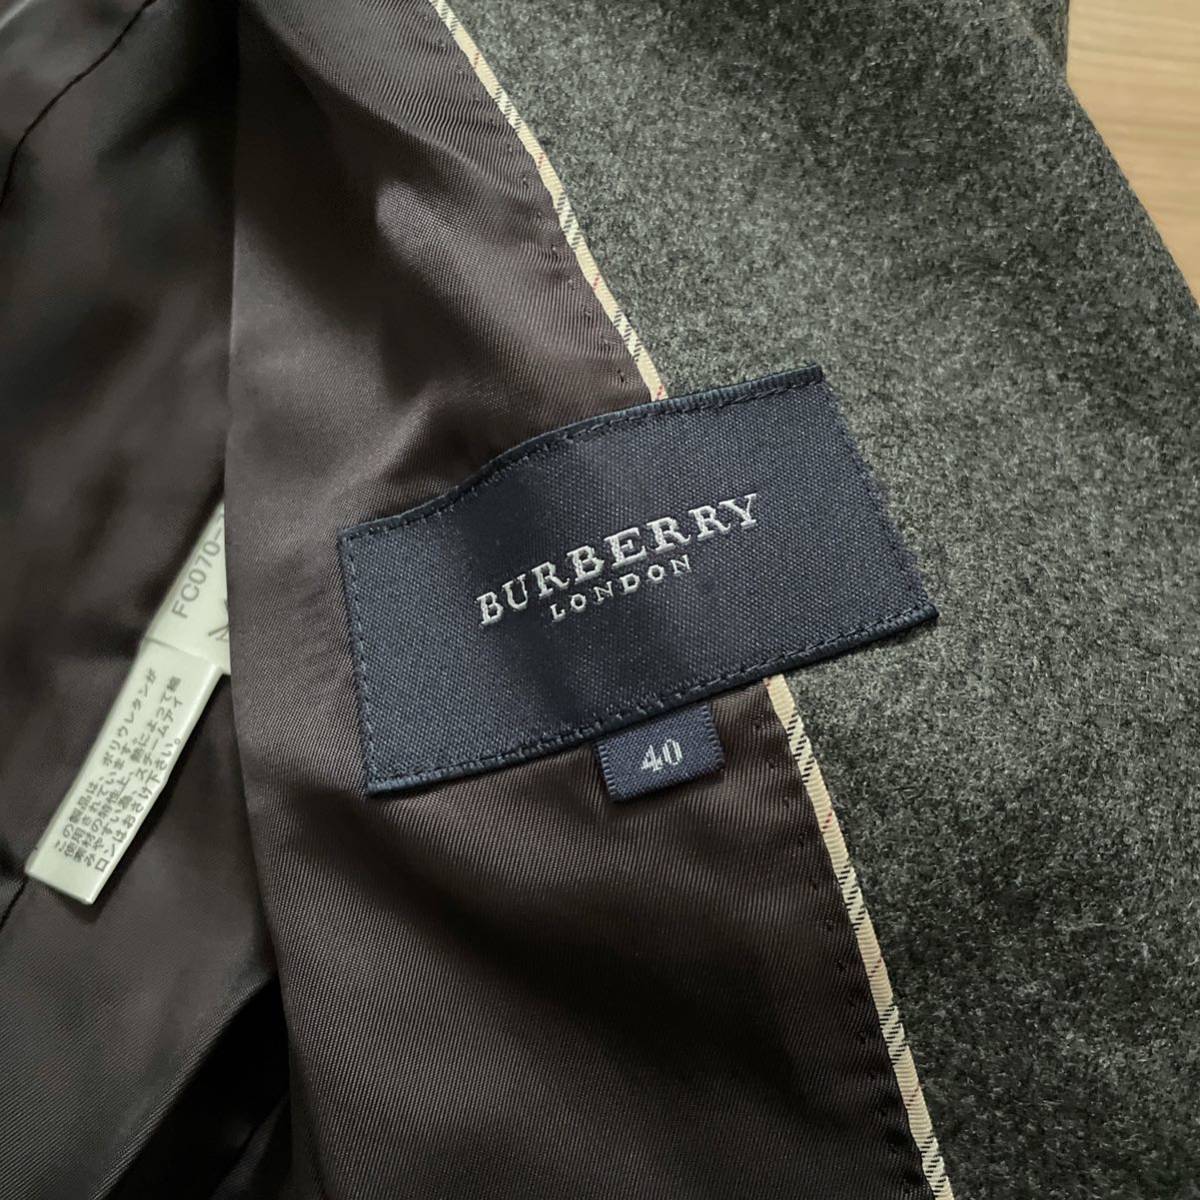 [ free shipping ][ ultimate beautiful goods ][ high class goods ]BURBERRY LONDON Burberry London wonderful flannel wool! pants suit charcoal gray 40